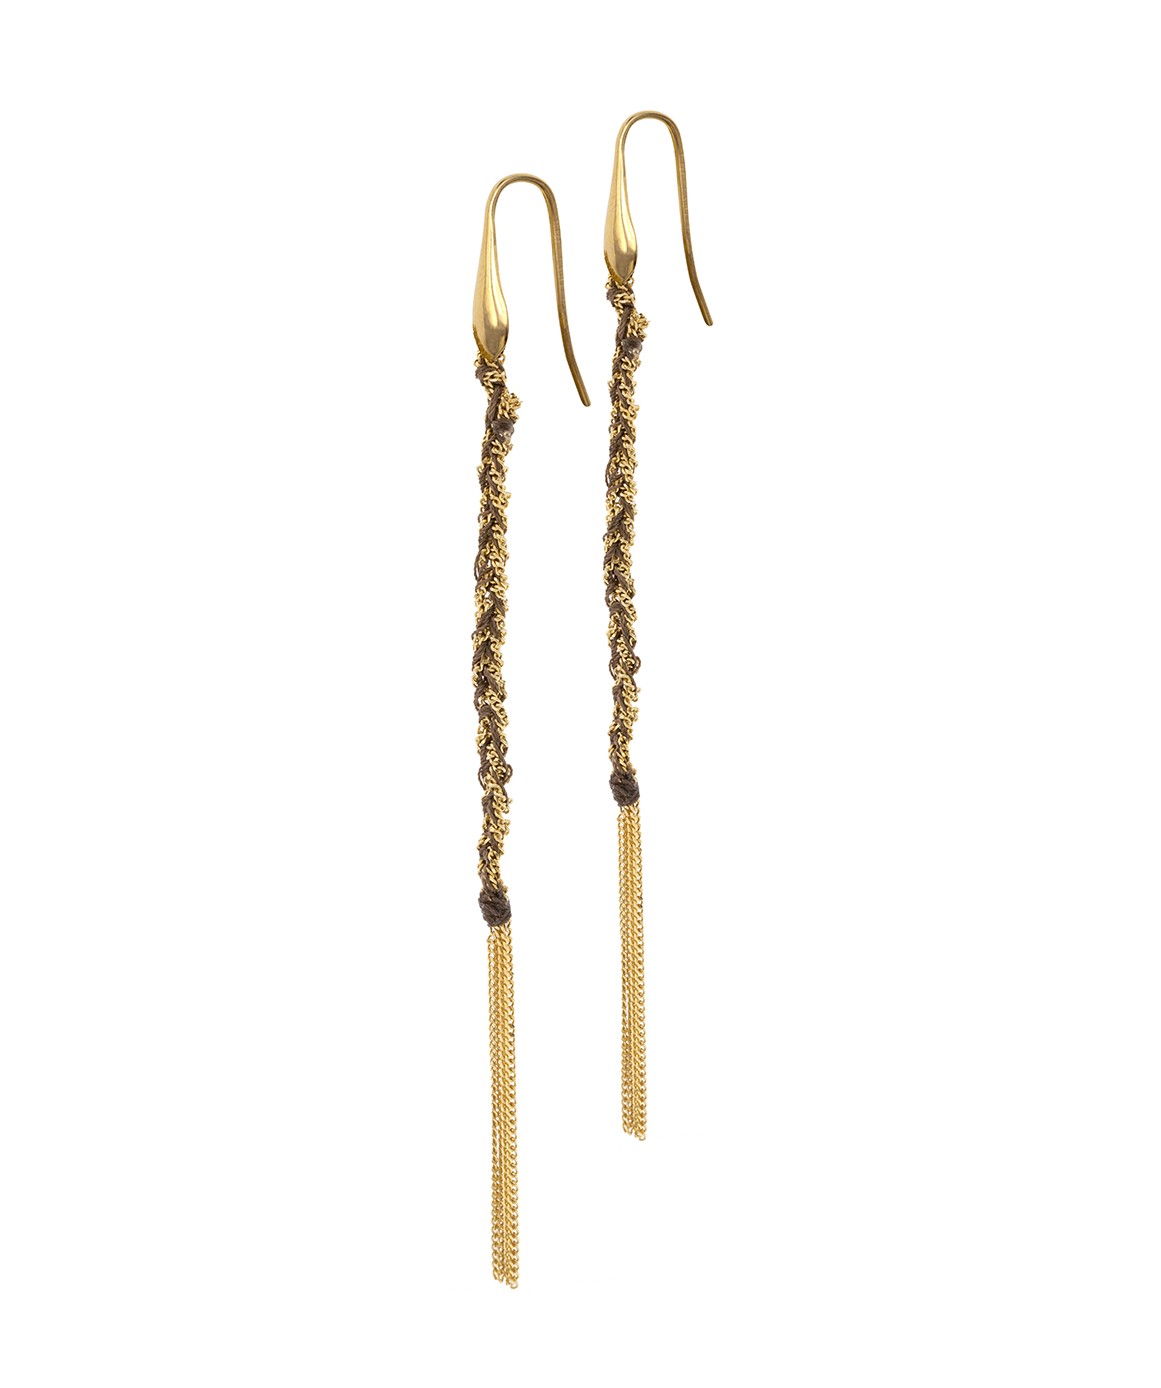 TWIST Earrings in Sterling Silver 18Kt. Yellow gold plated. Fabric: Brown